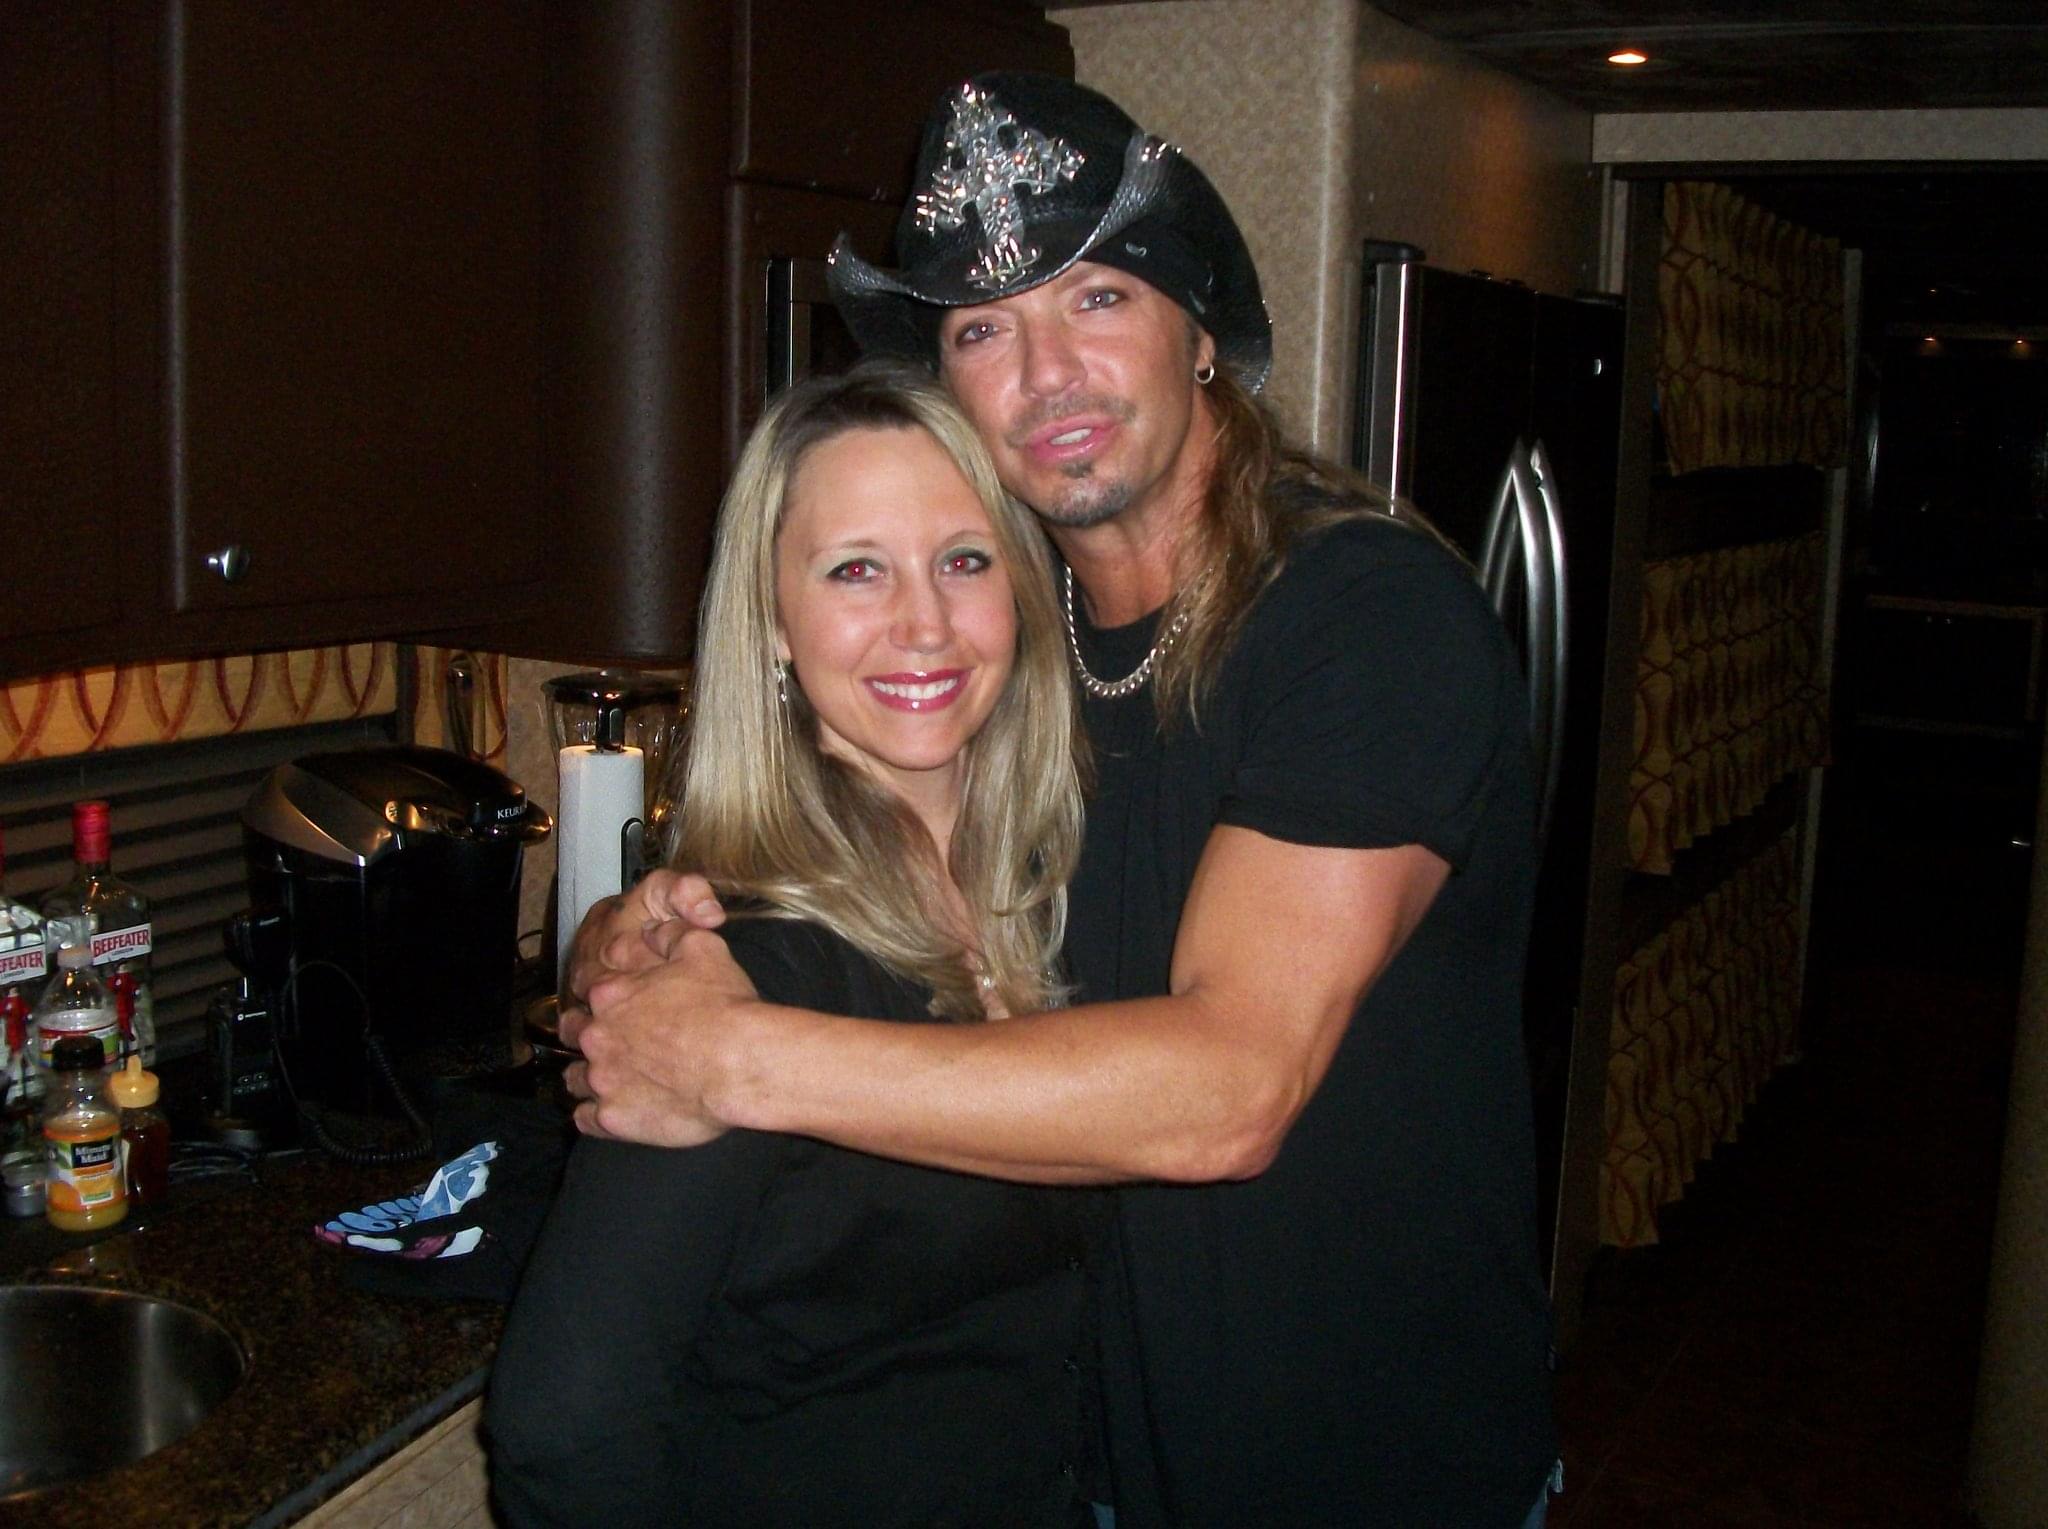 Bret Michaels Planning a Stop in Altoona